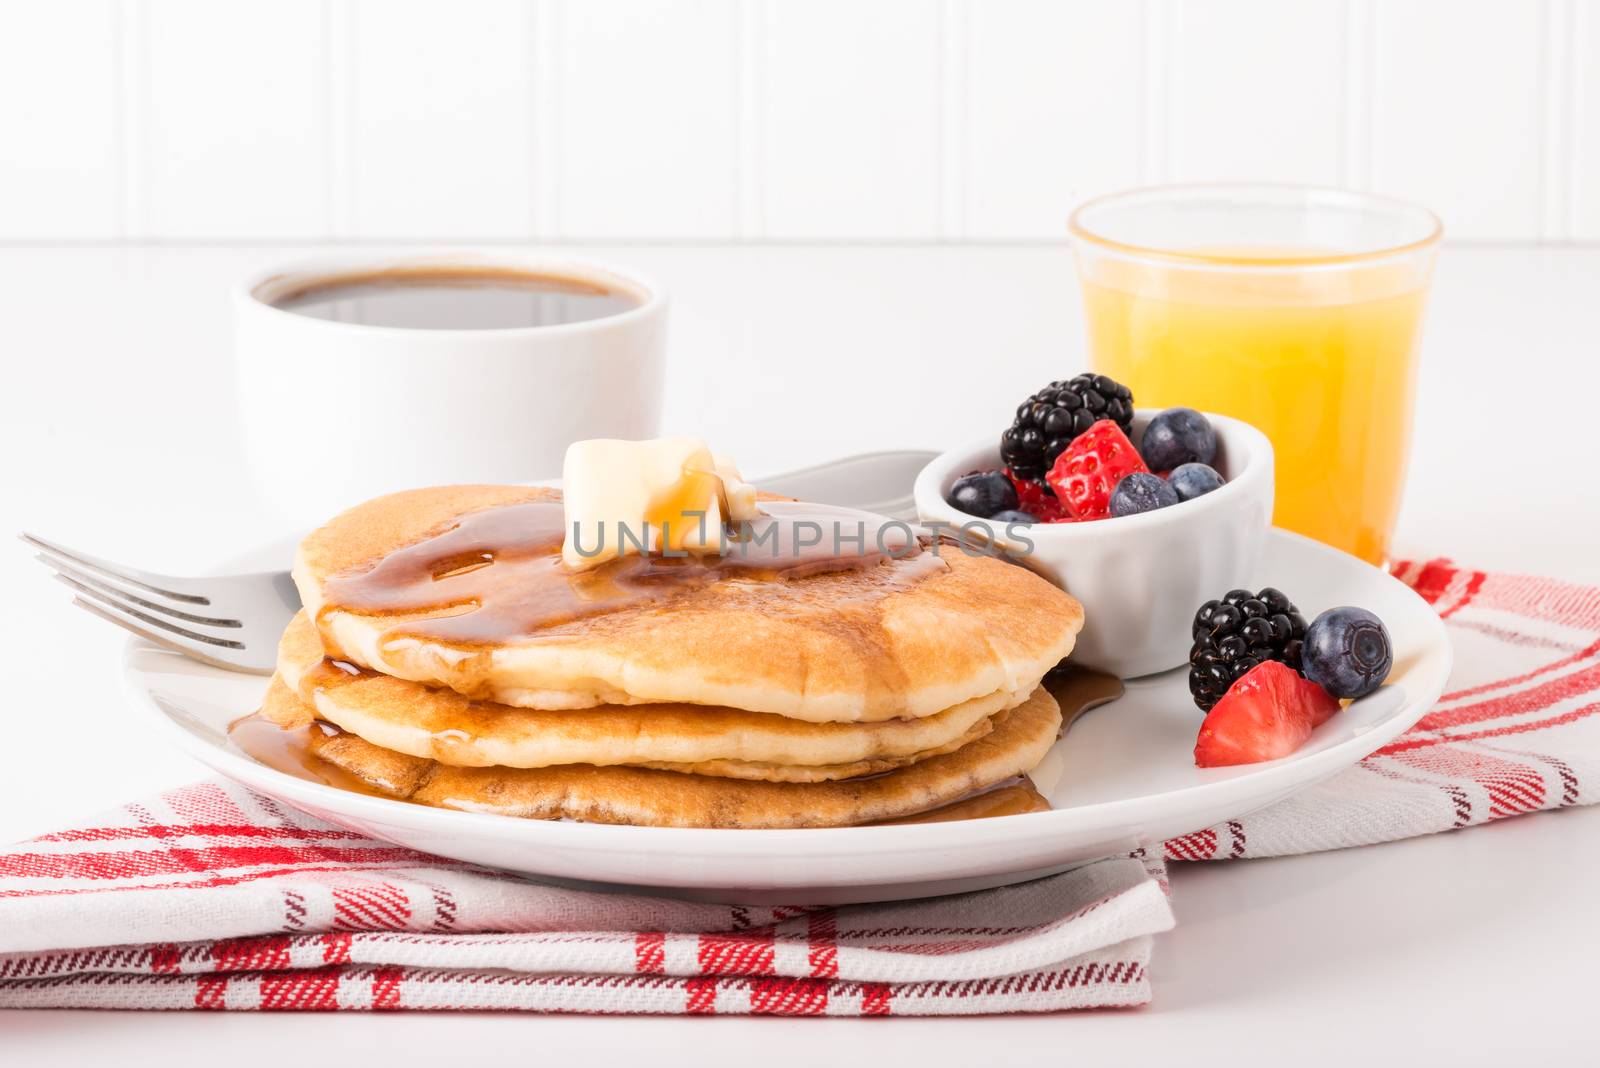 Pancakes and maple syrup with coffee and orange juice.